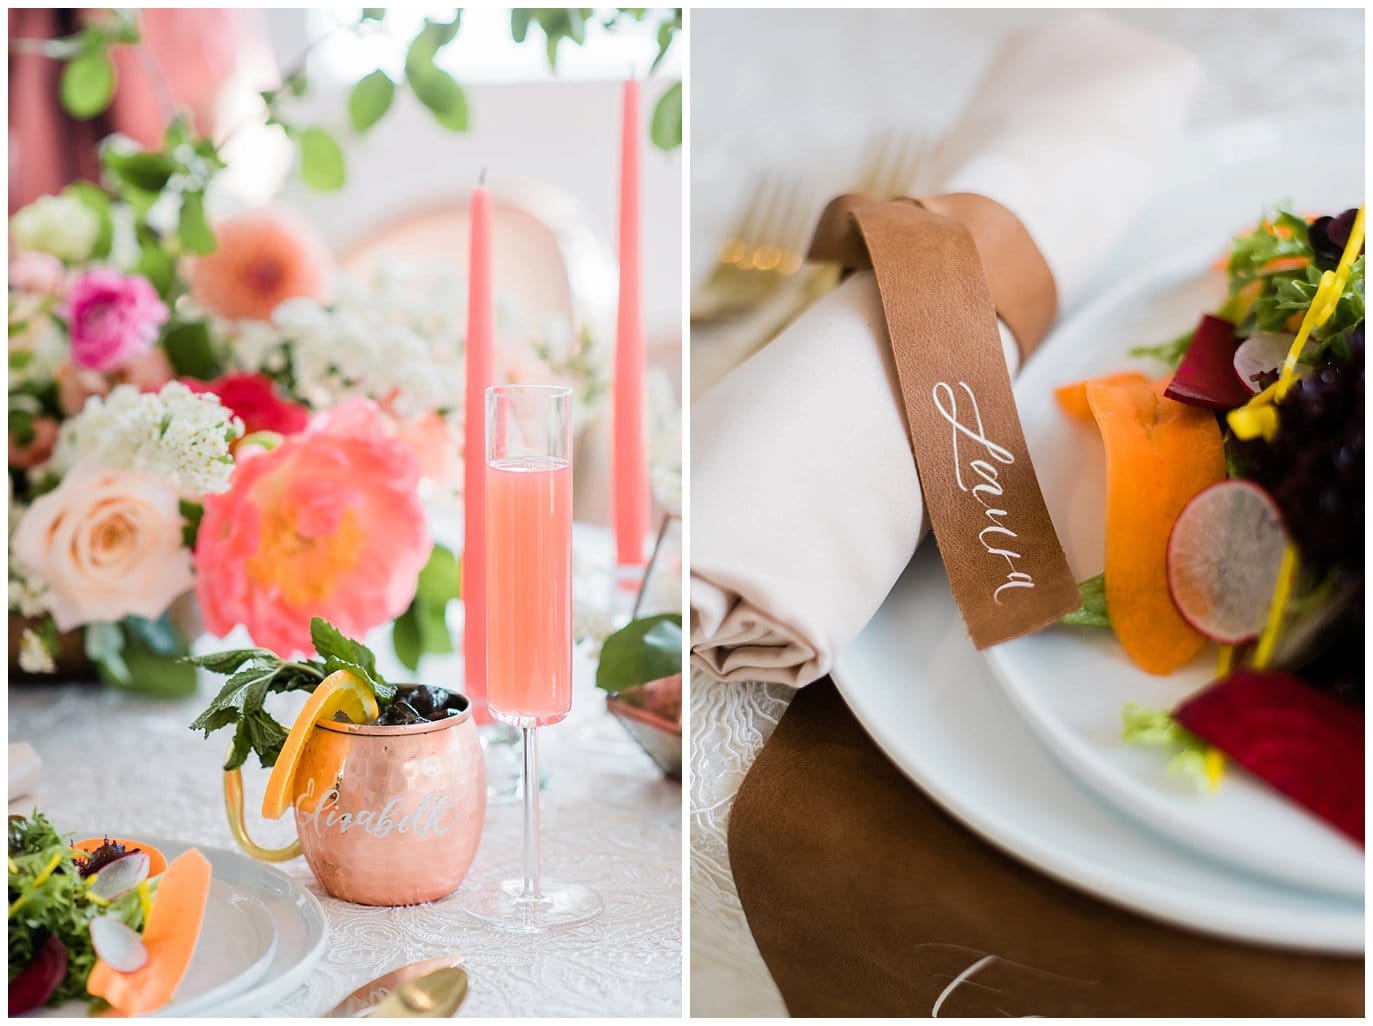 leather napkin rings and copper mugs wedding inspiration at summer blanc wedding by blanc wedding photographer Jennie Crate photographer